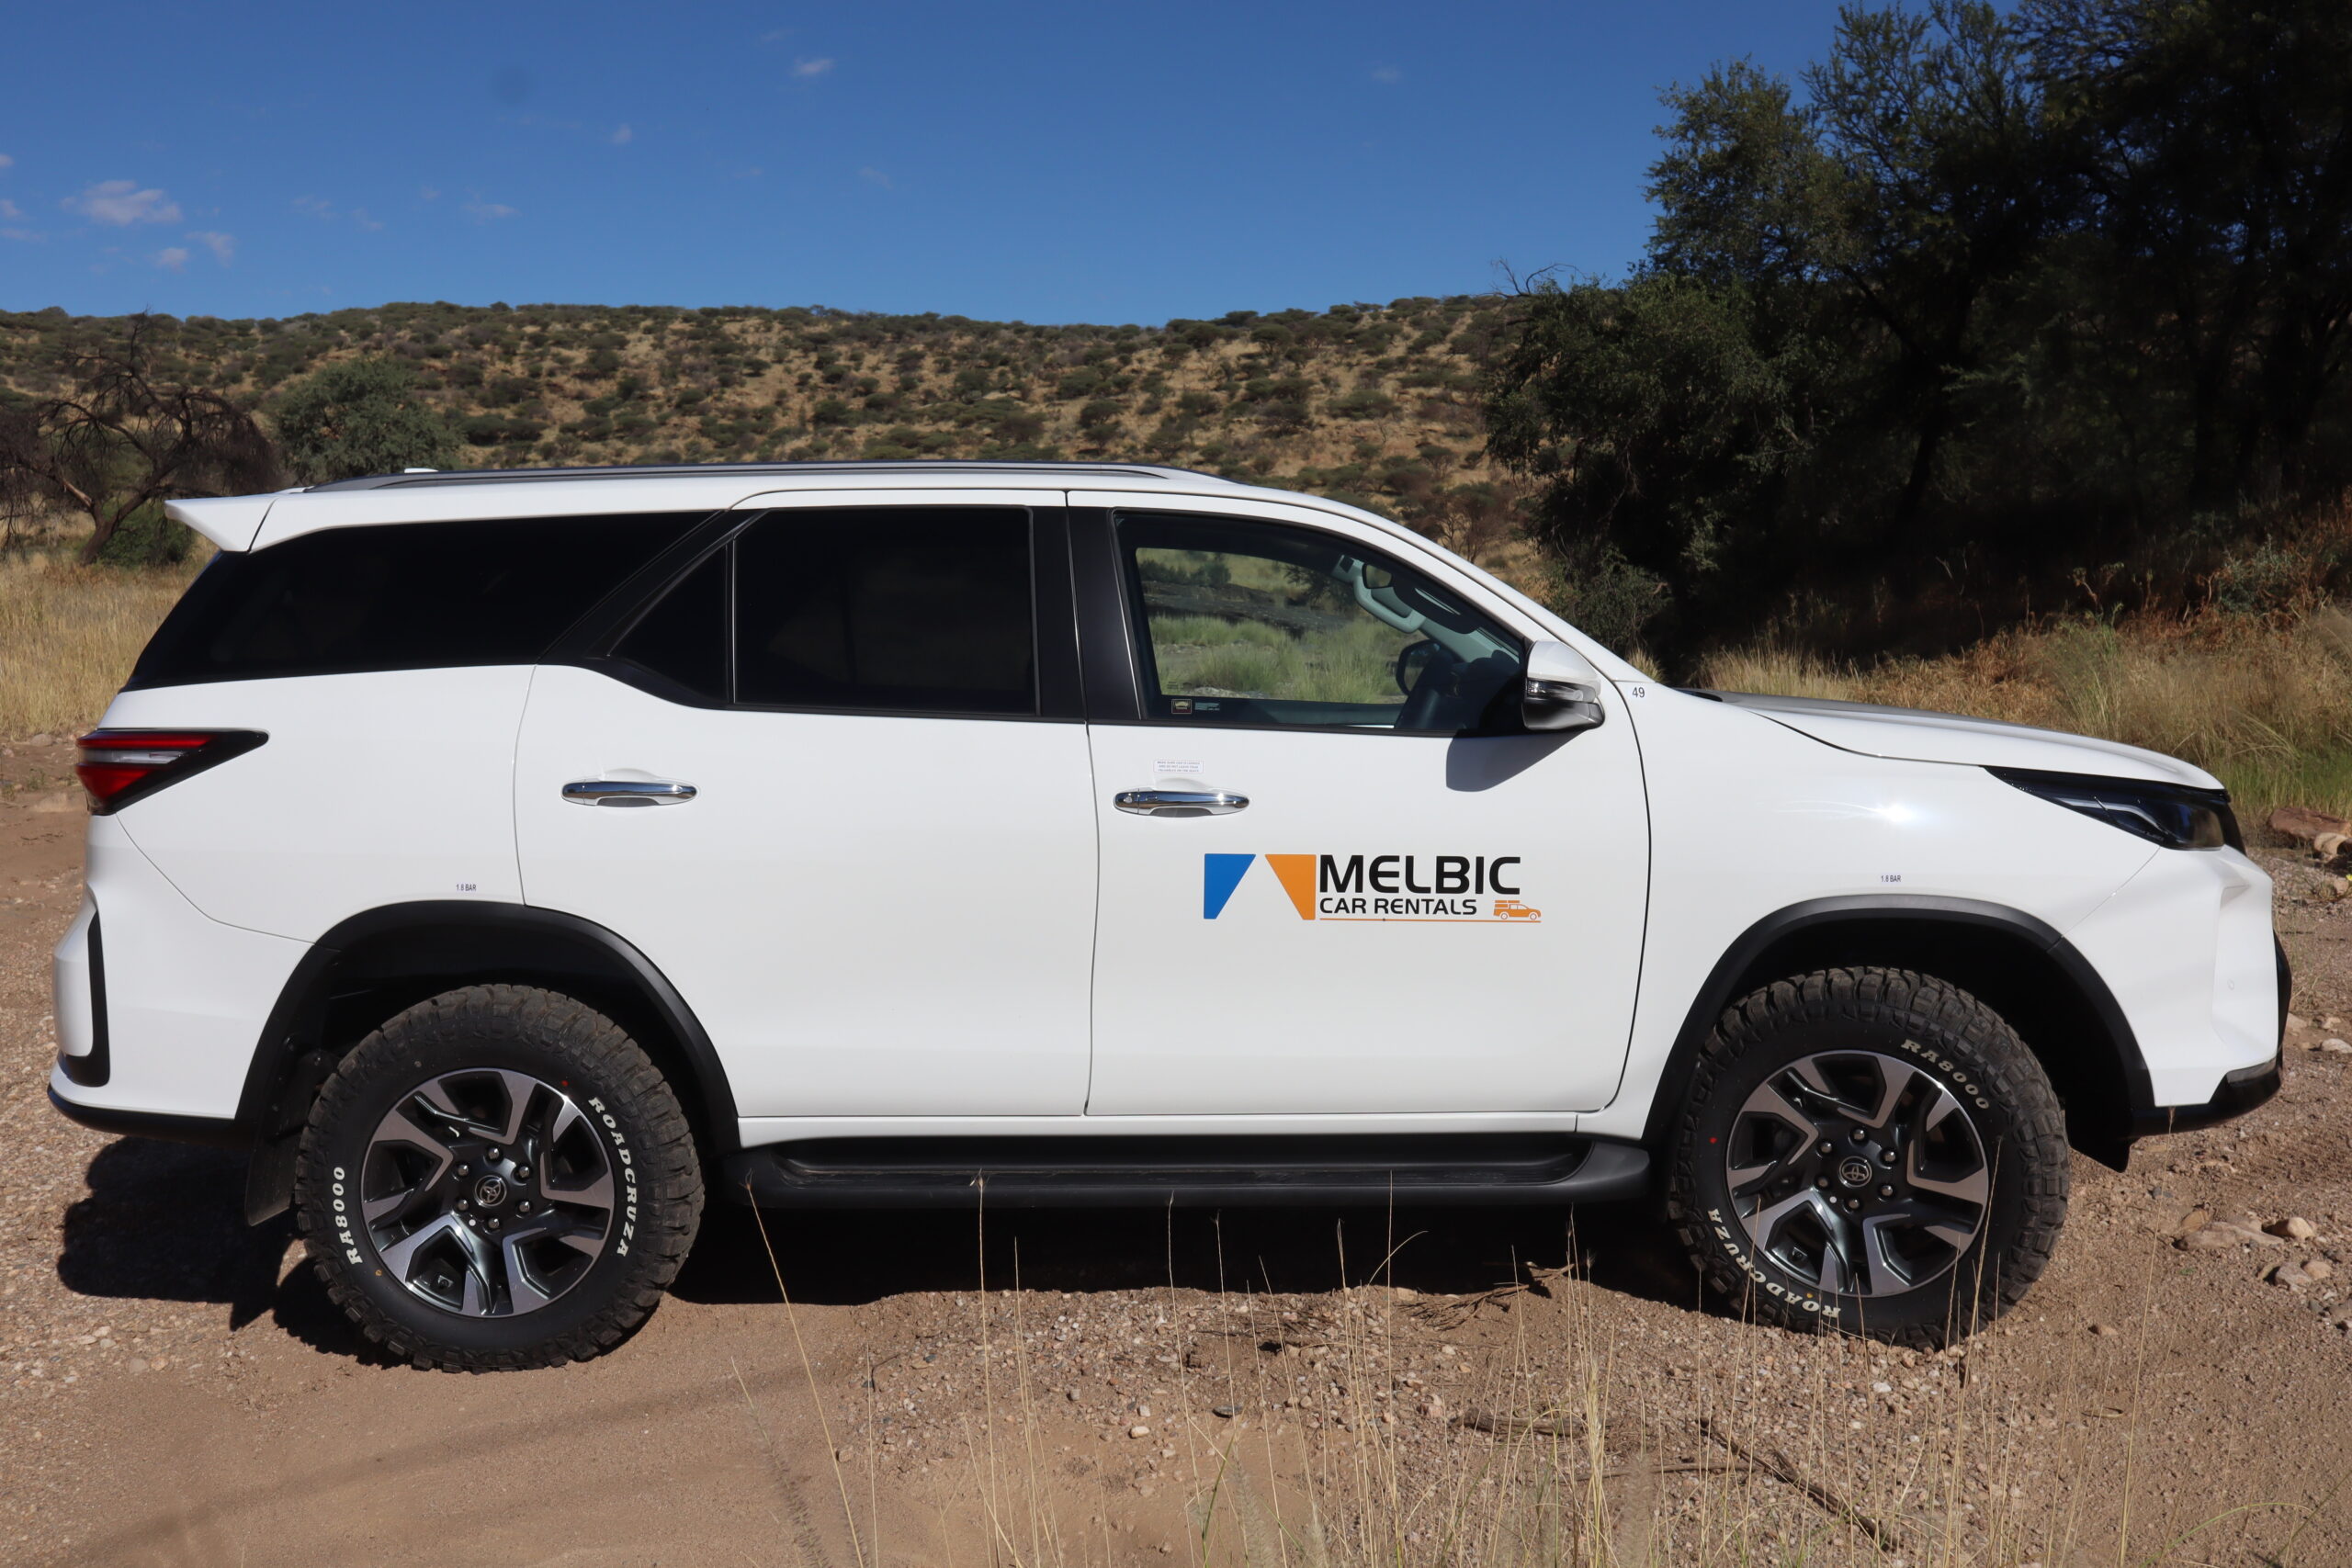 Melbic 4x4 Car Rentals Namibia Toyota Fortuner Side View